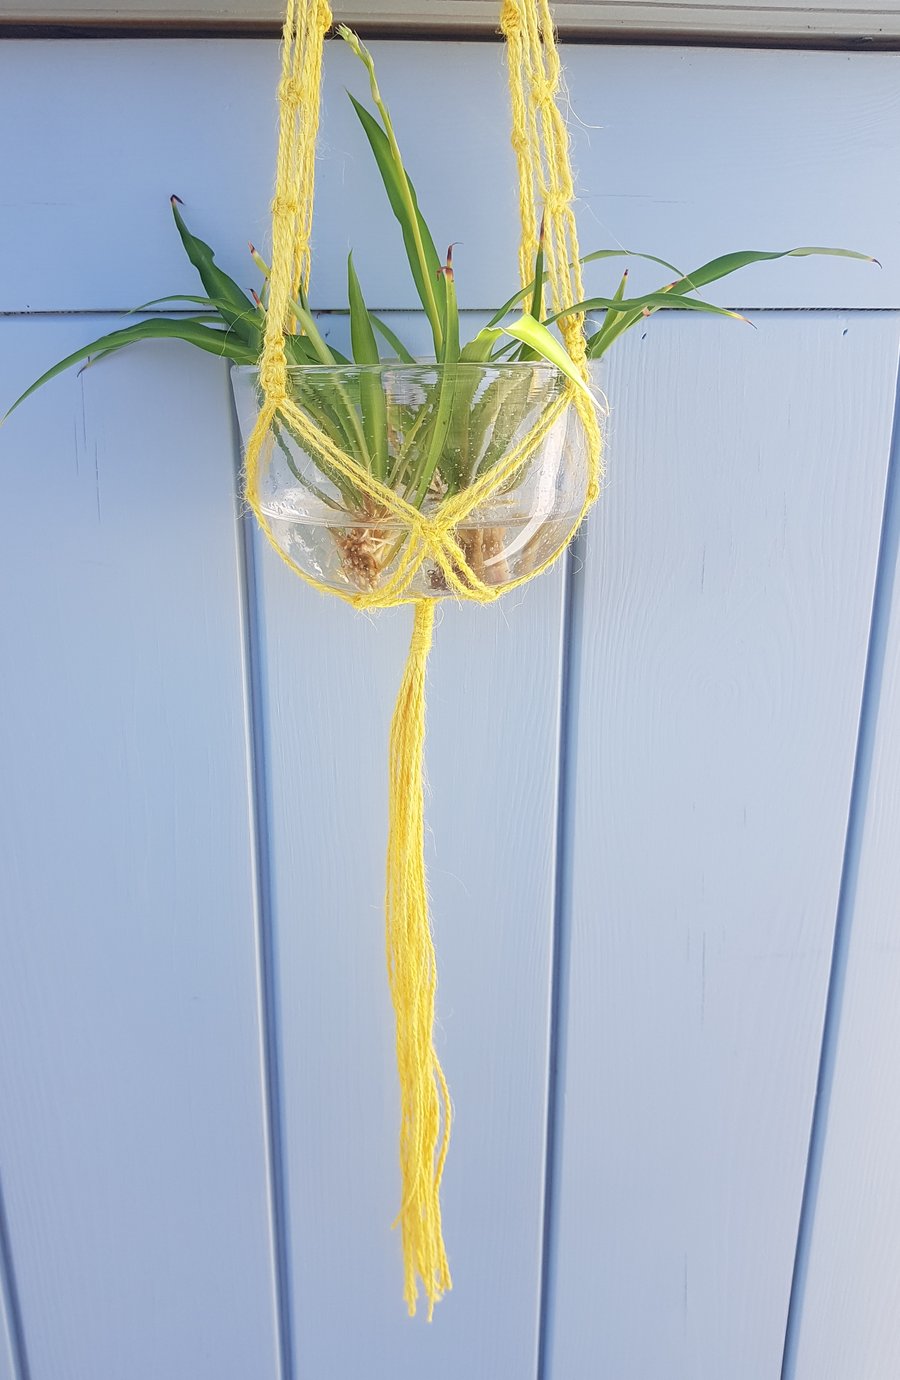 Seconds Sunday rustic macrame plant holder hanging basket with wooden beads